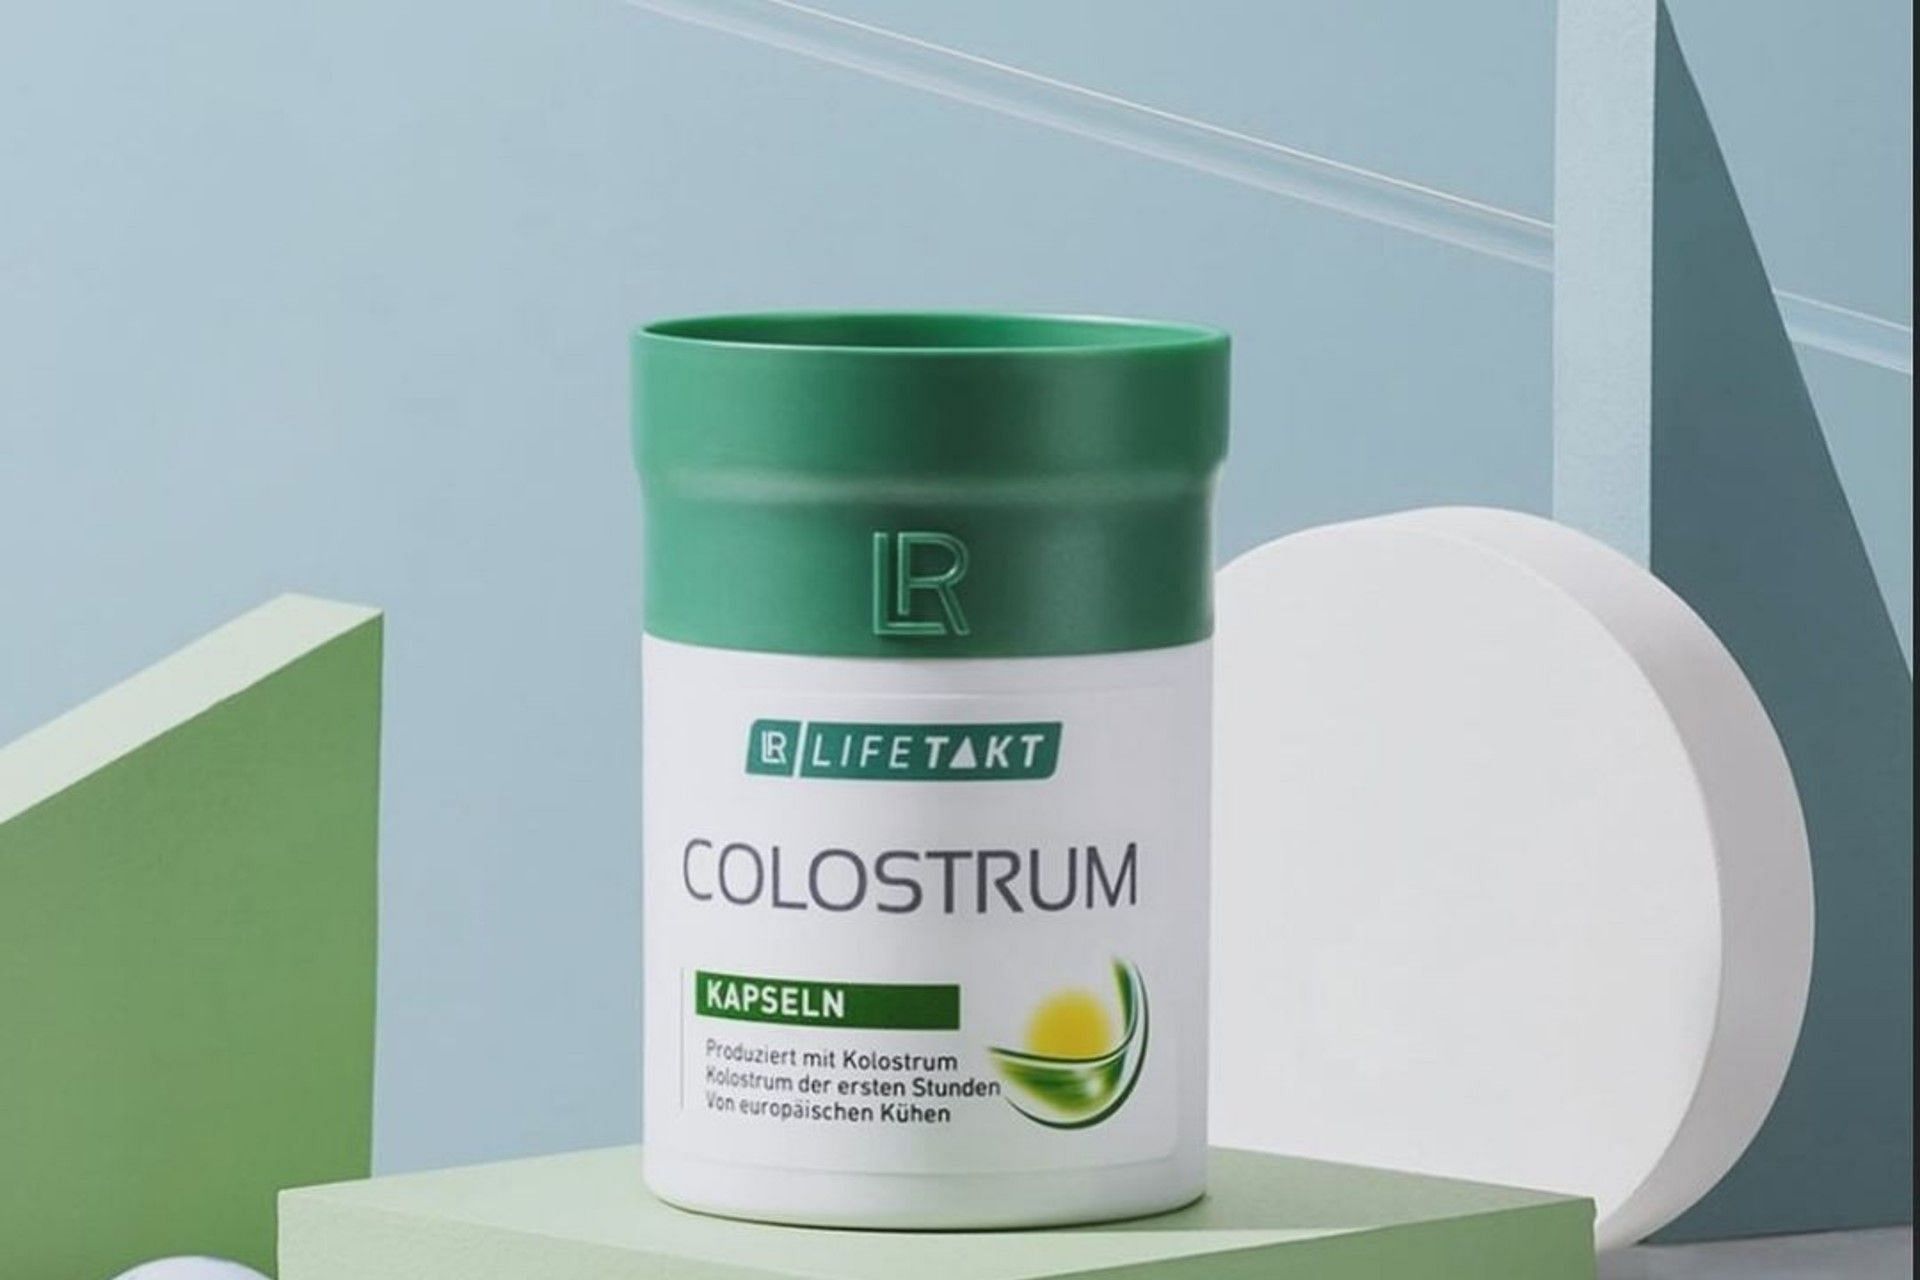 Colostrum supplements for the health (Image by adella_lr.beauty/Instagram)